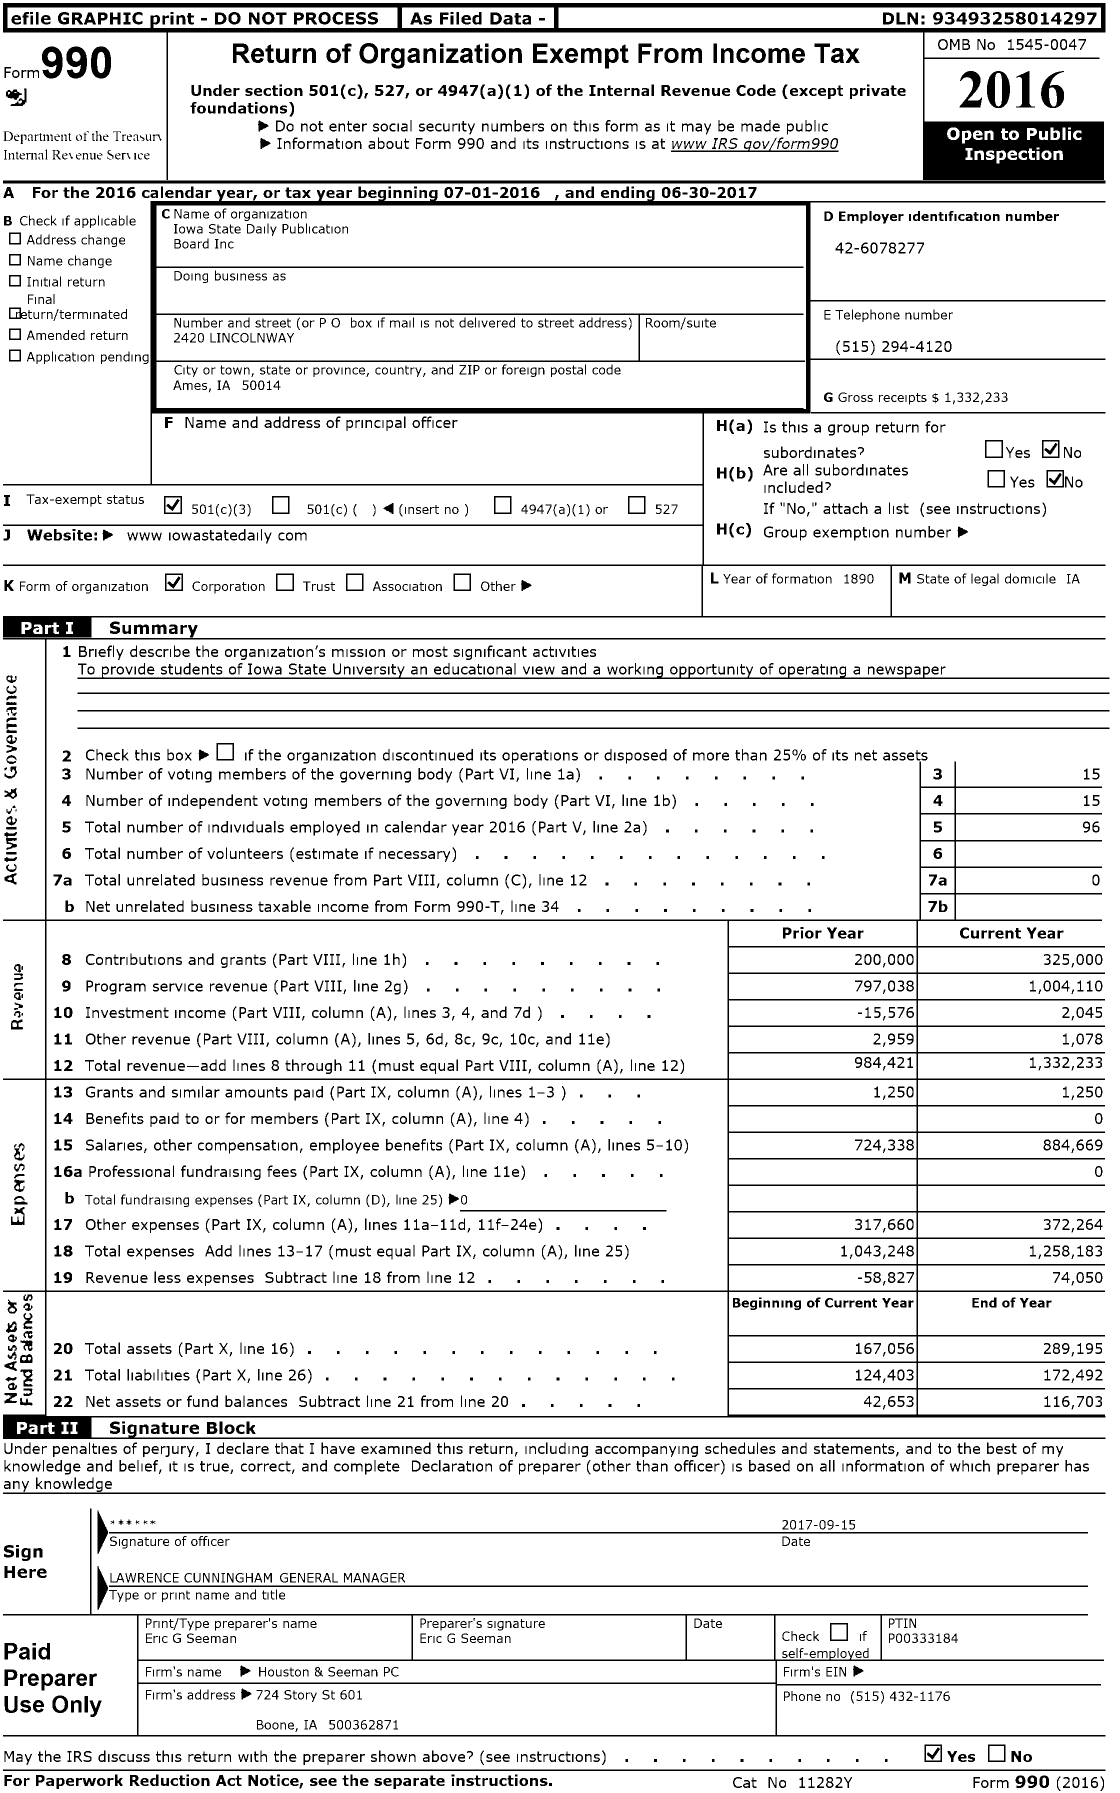 Image of first page of 2016 Form 990 for Iowa State Daily Publication Board